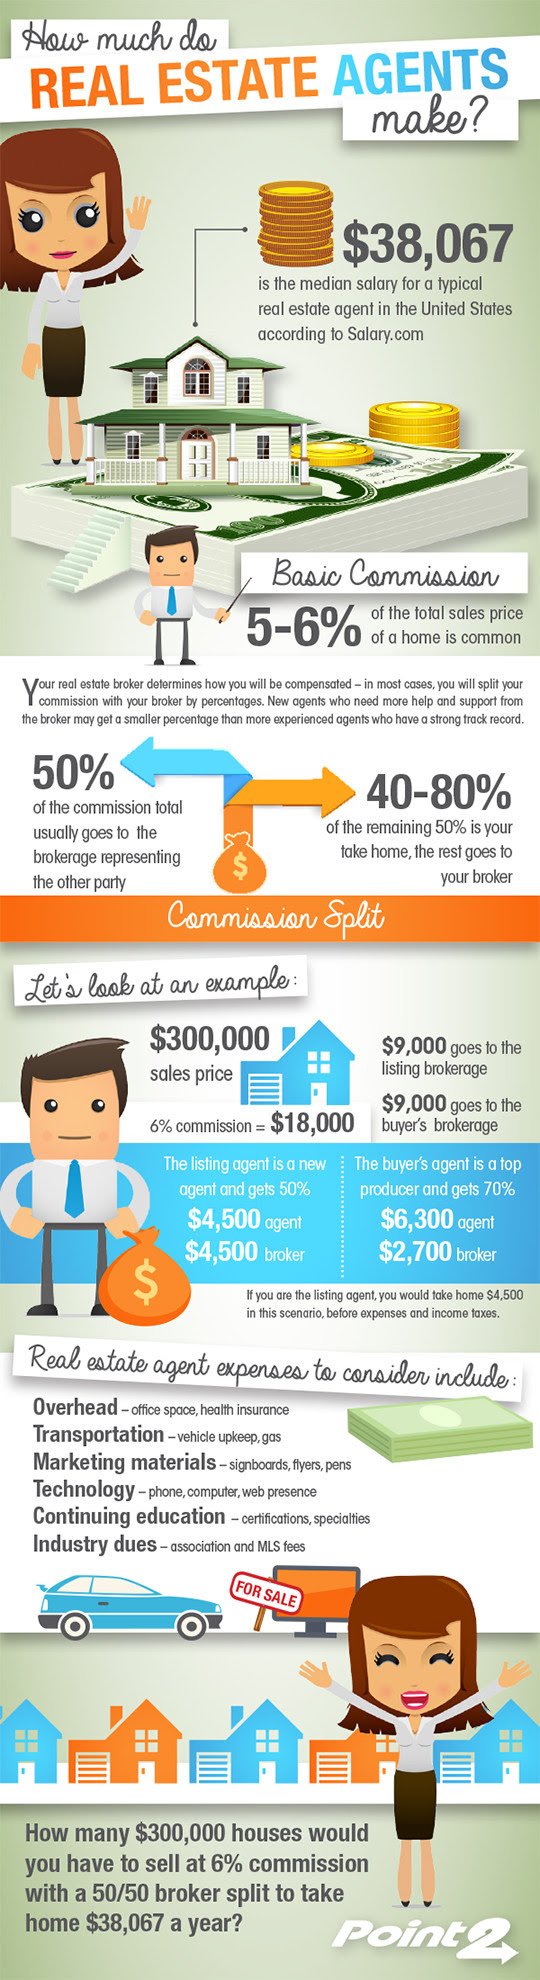 what percentage of house sale do you keep